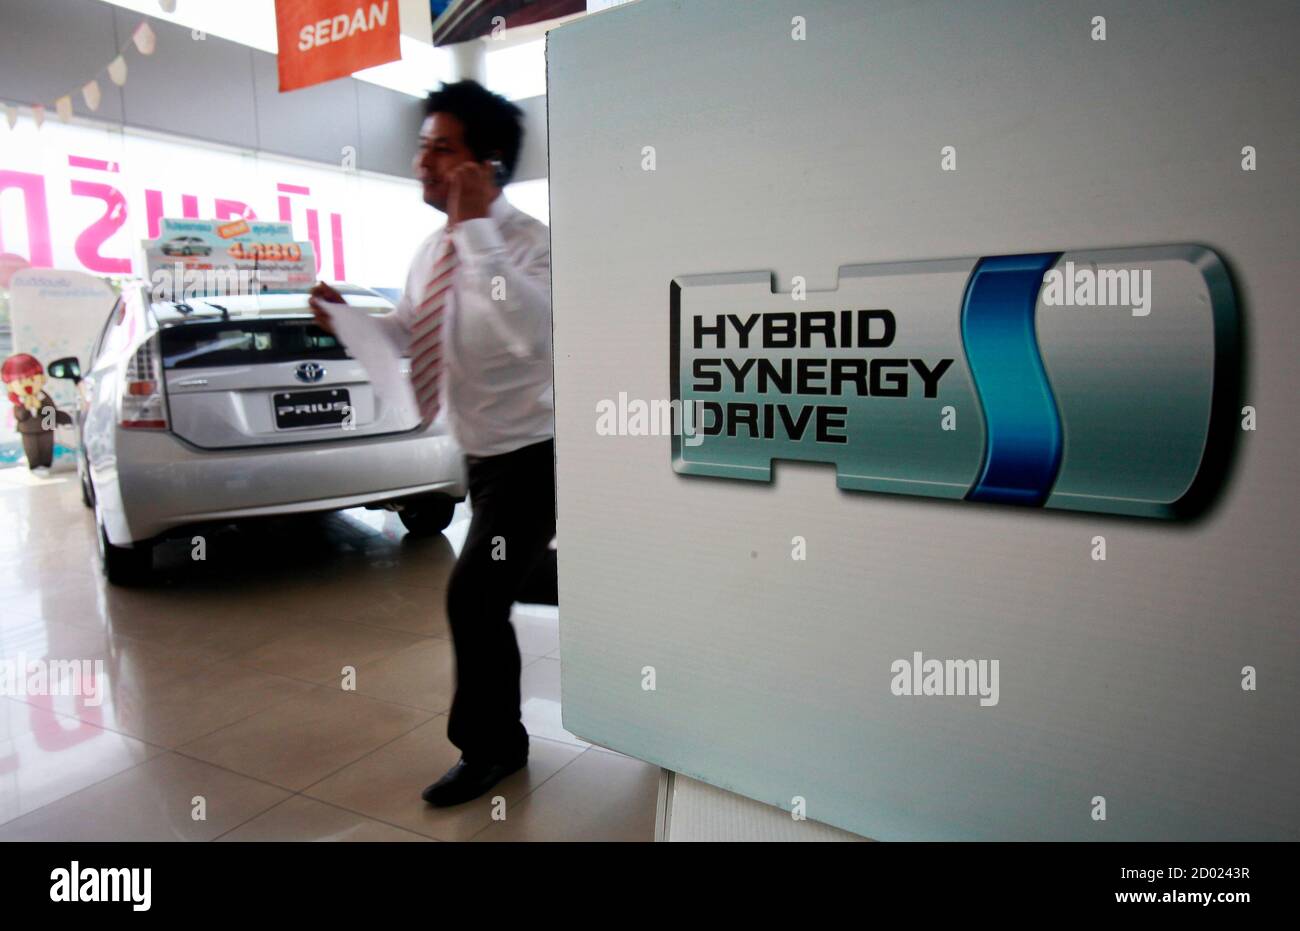 A car salesman talks on the phone behind a Toyota Prius in a showroom selling cars made in Thailand with parts imported from Japan, in downtown Bangkok May 12, 2011. The entire global auto industry has been hit by supply chain disruption since the March 11 earthquake and tsunami in Japan. But the domination of Japanese original equipment manufacturers in Southeast Asia makes the region particularly vulnerable, industry experts say. Analysts say the real impact on the sector is likely to be felt in the second half of 2011, affecting vehicle distributors and parts makers. To match Analysis AUTOS Stock Photo